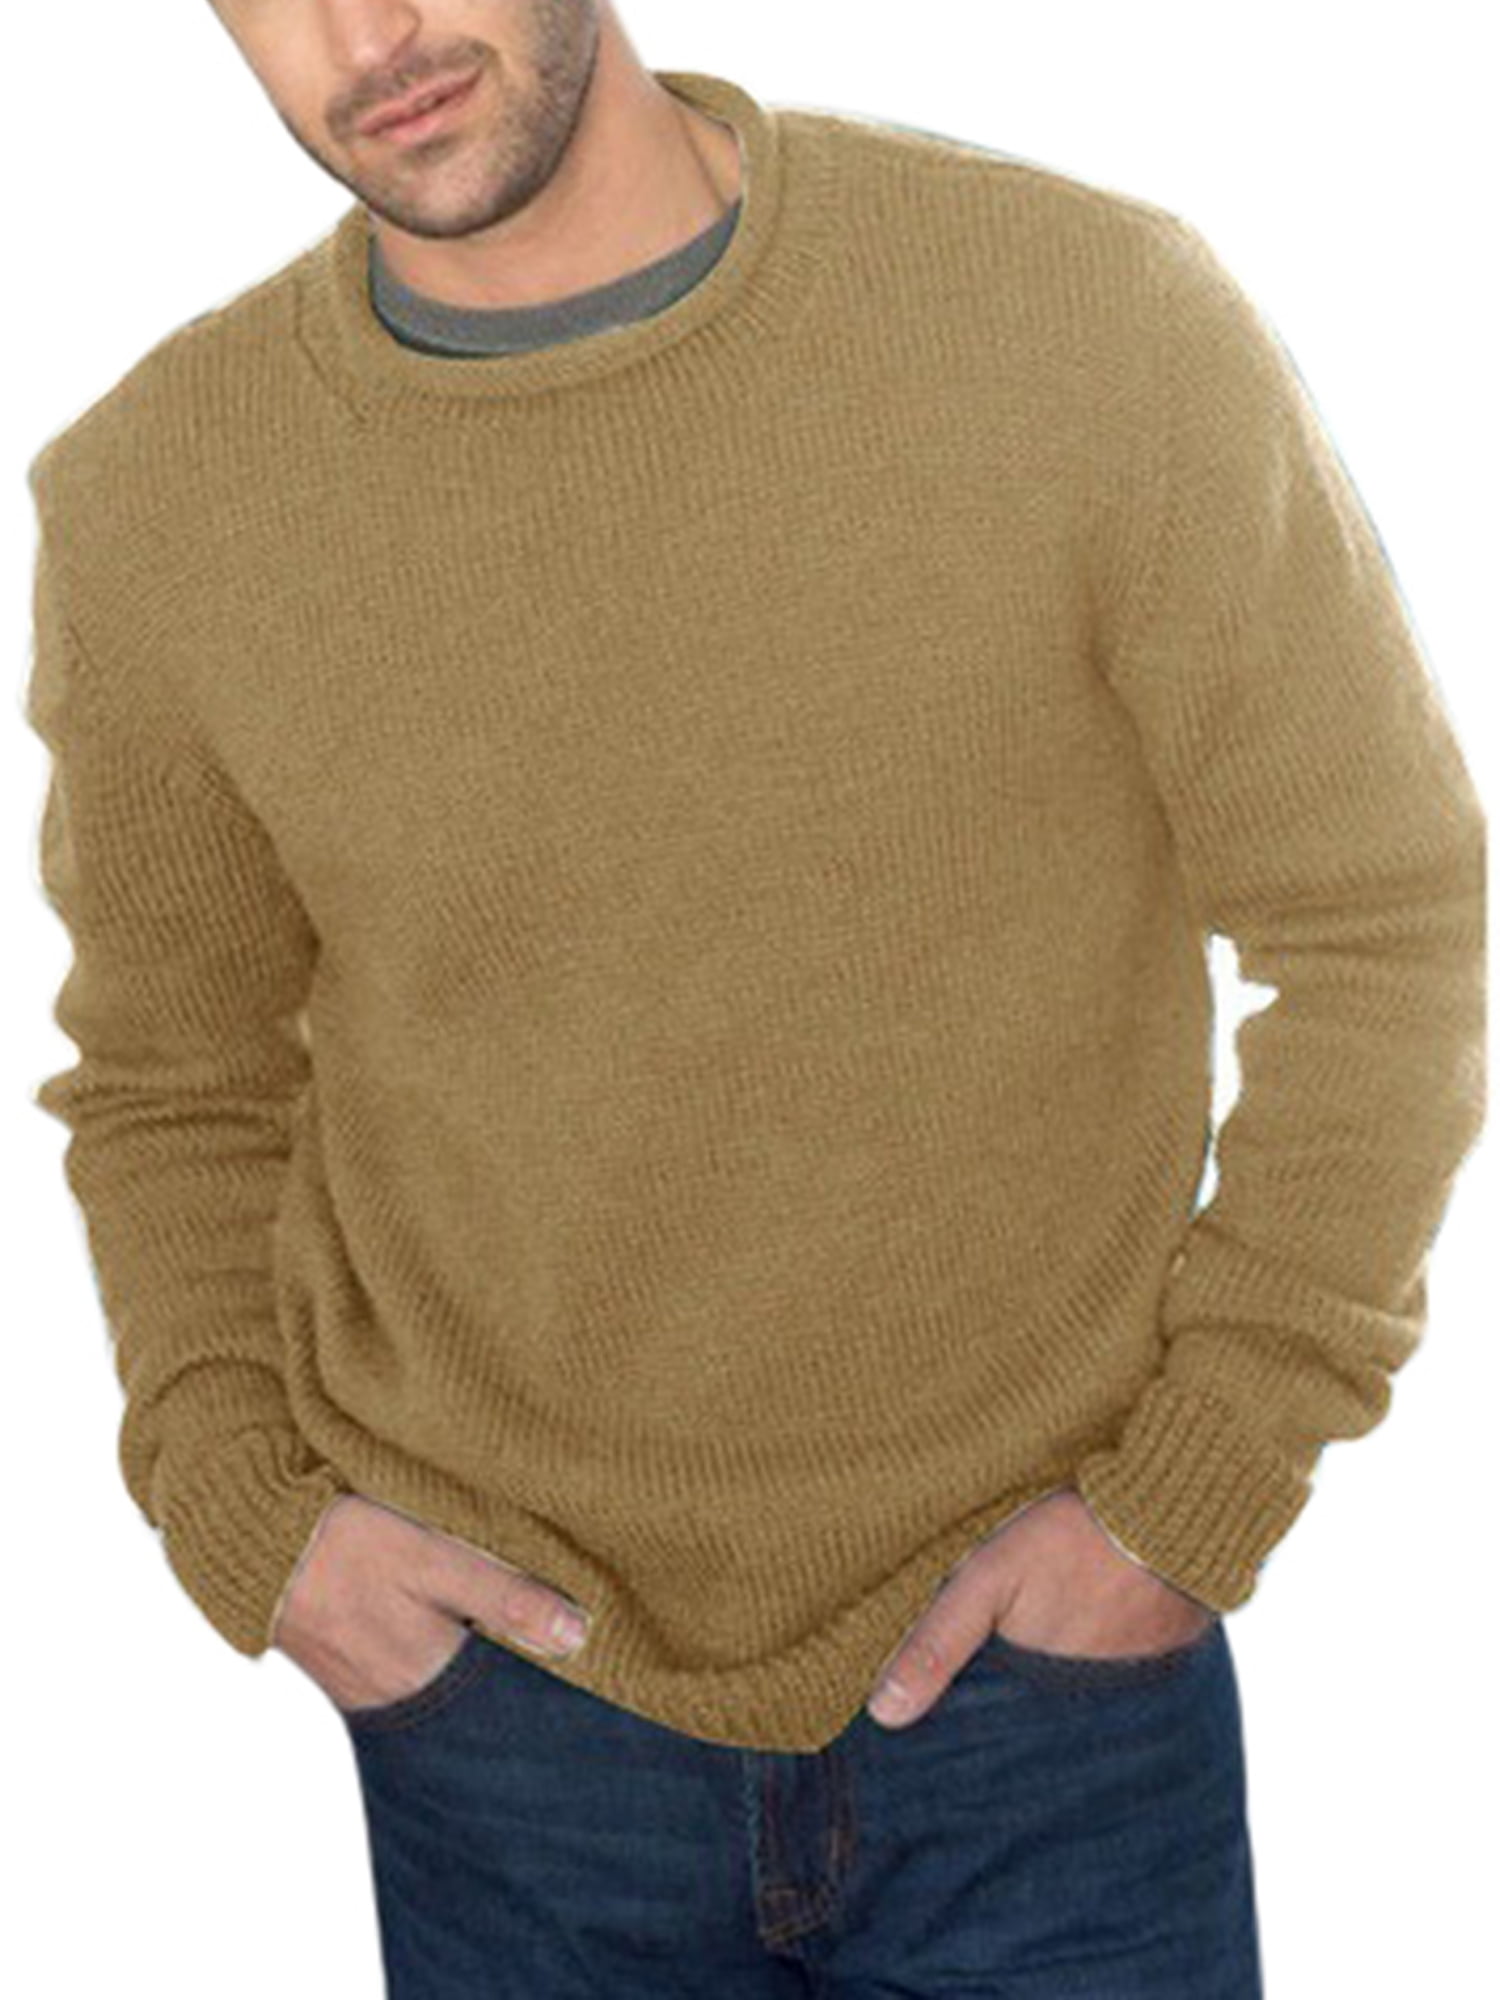 ninovino Mens Sweater Casual Slim Fit Knitted Turtleneck Pullover 